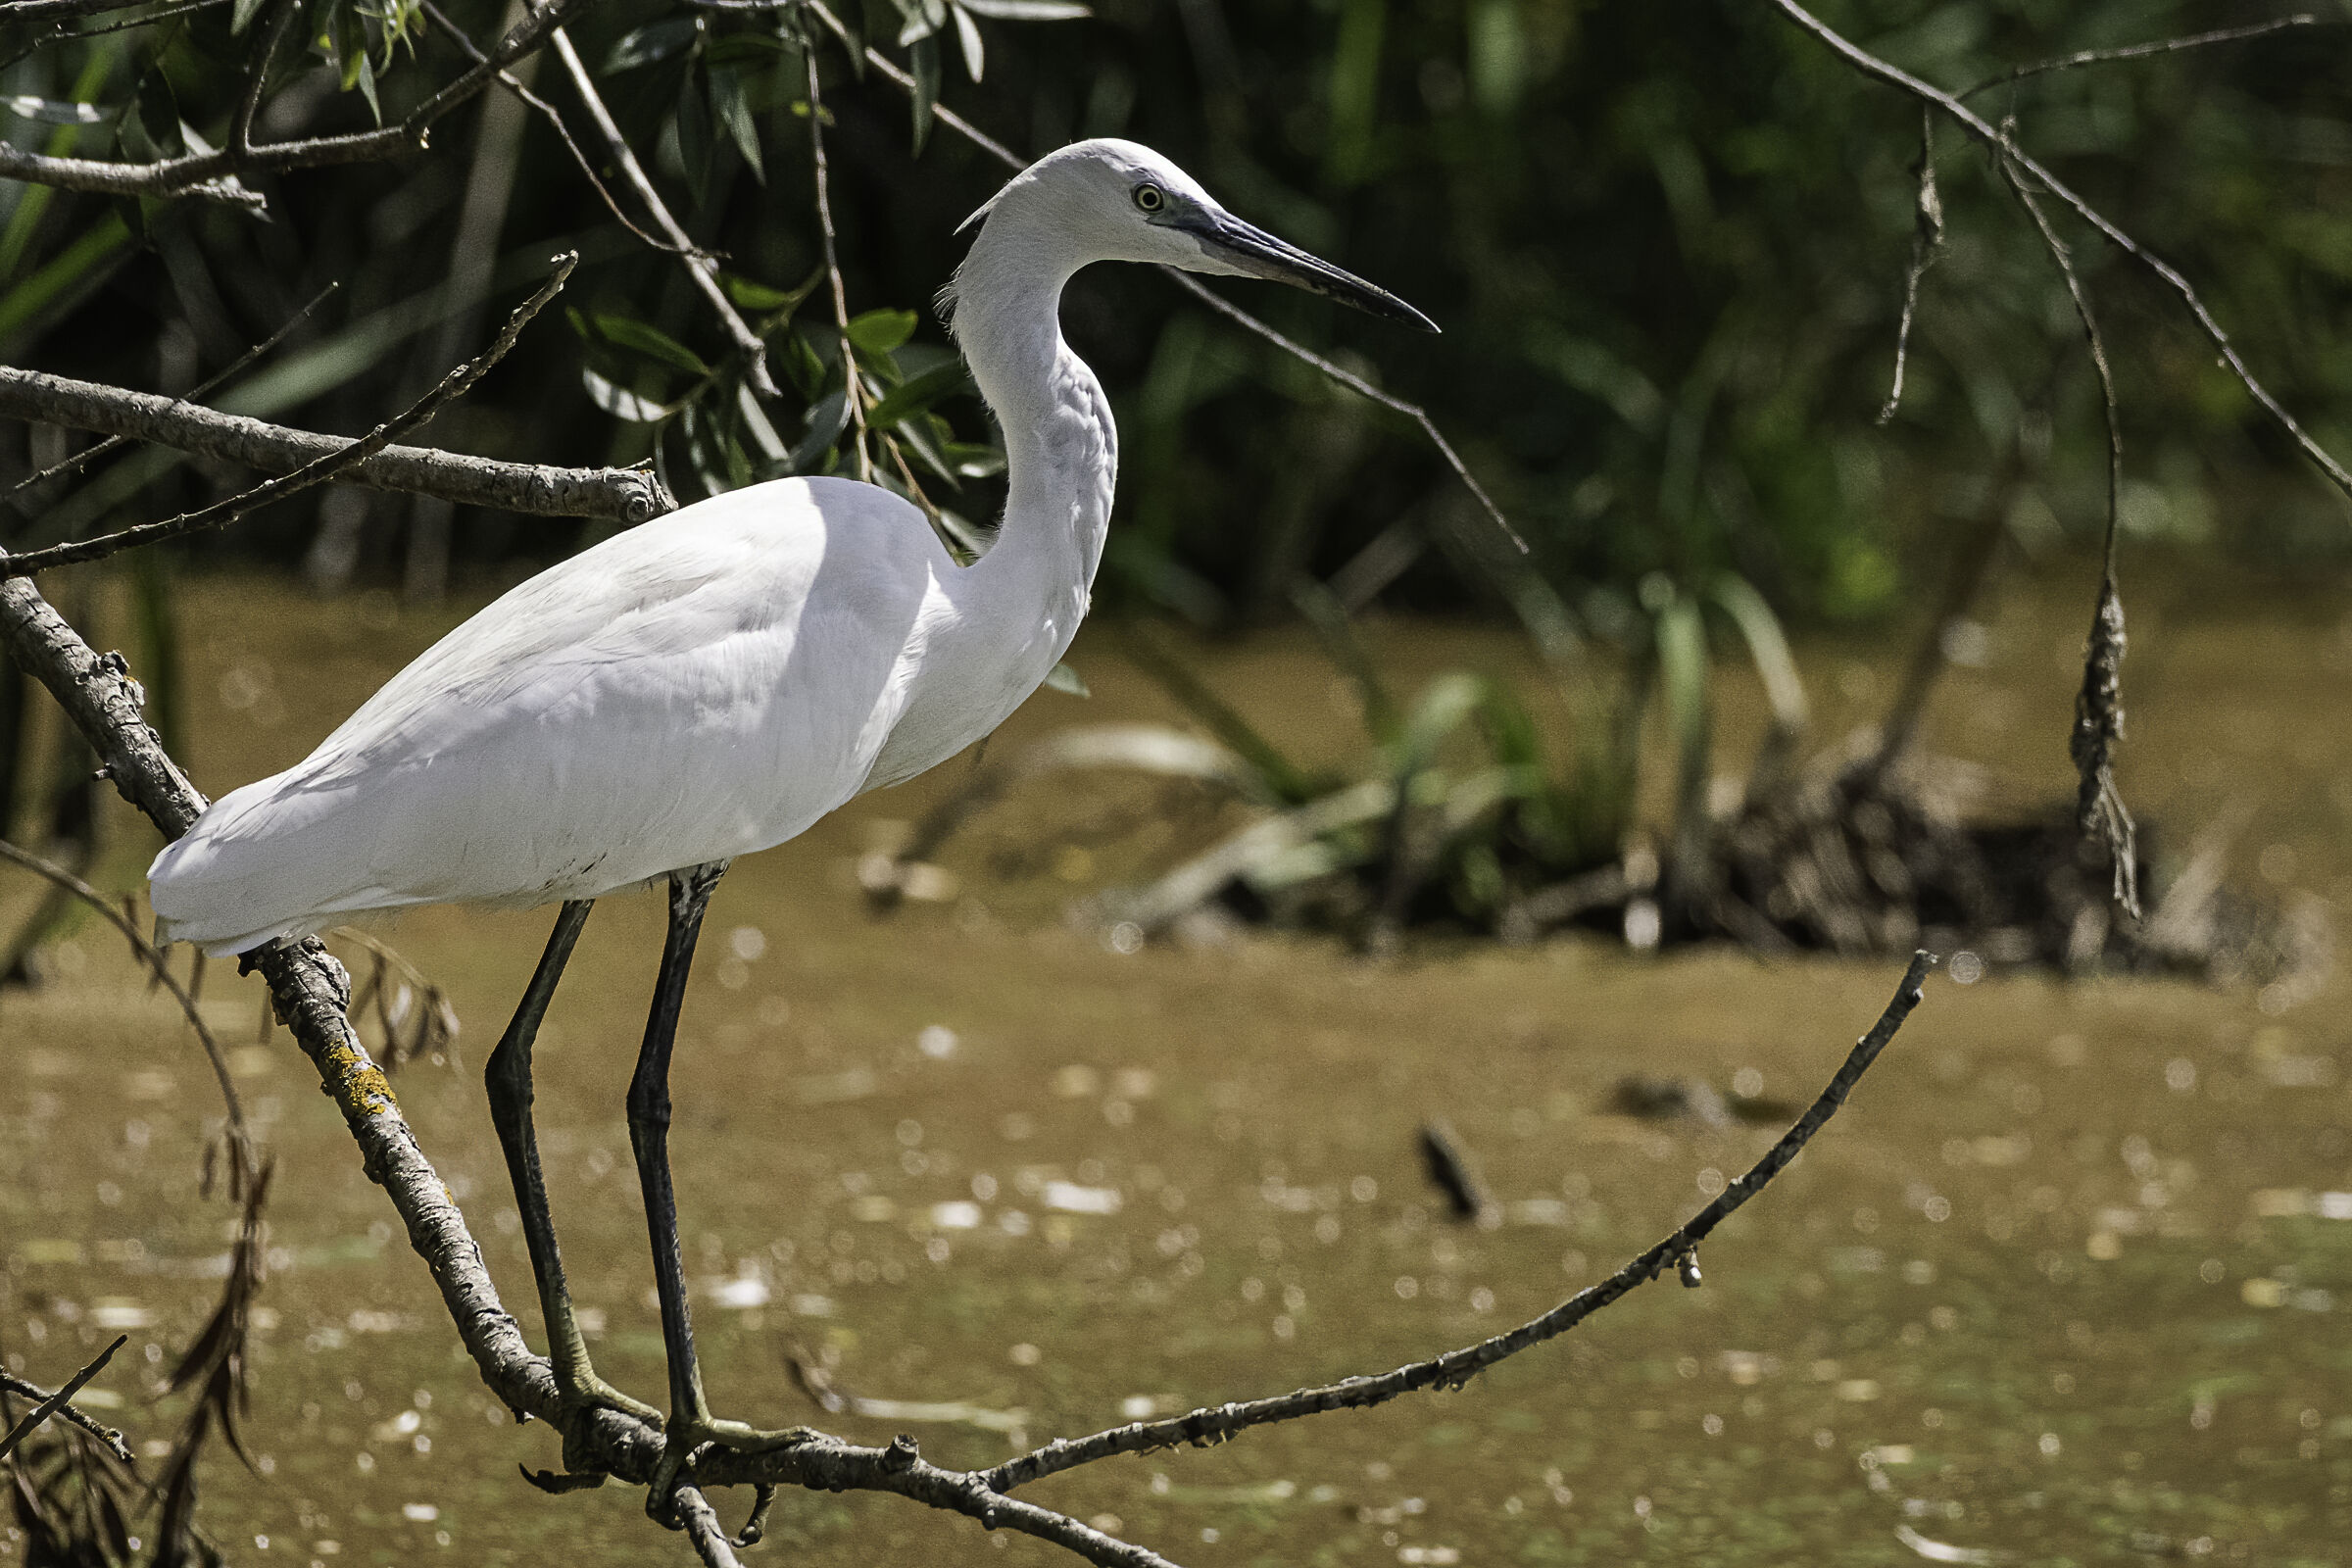 The egrets on the branch...